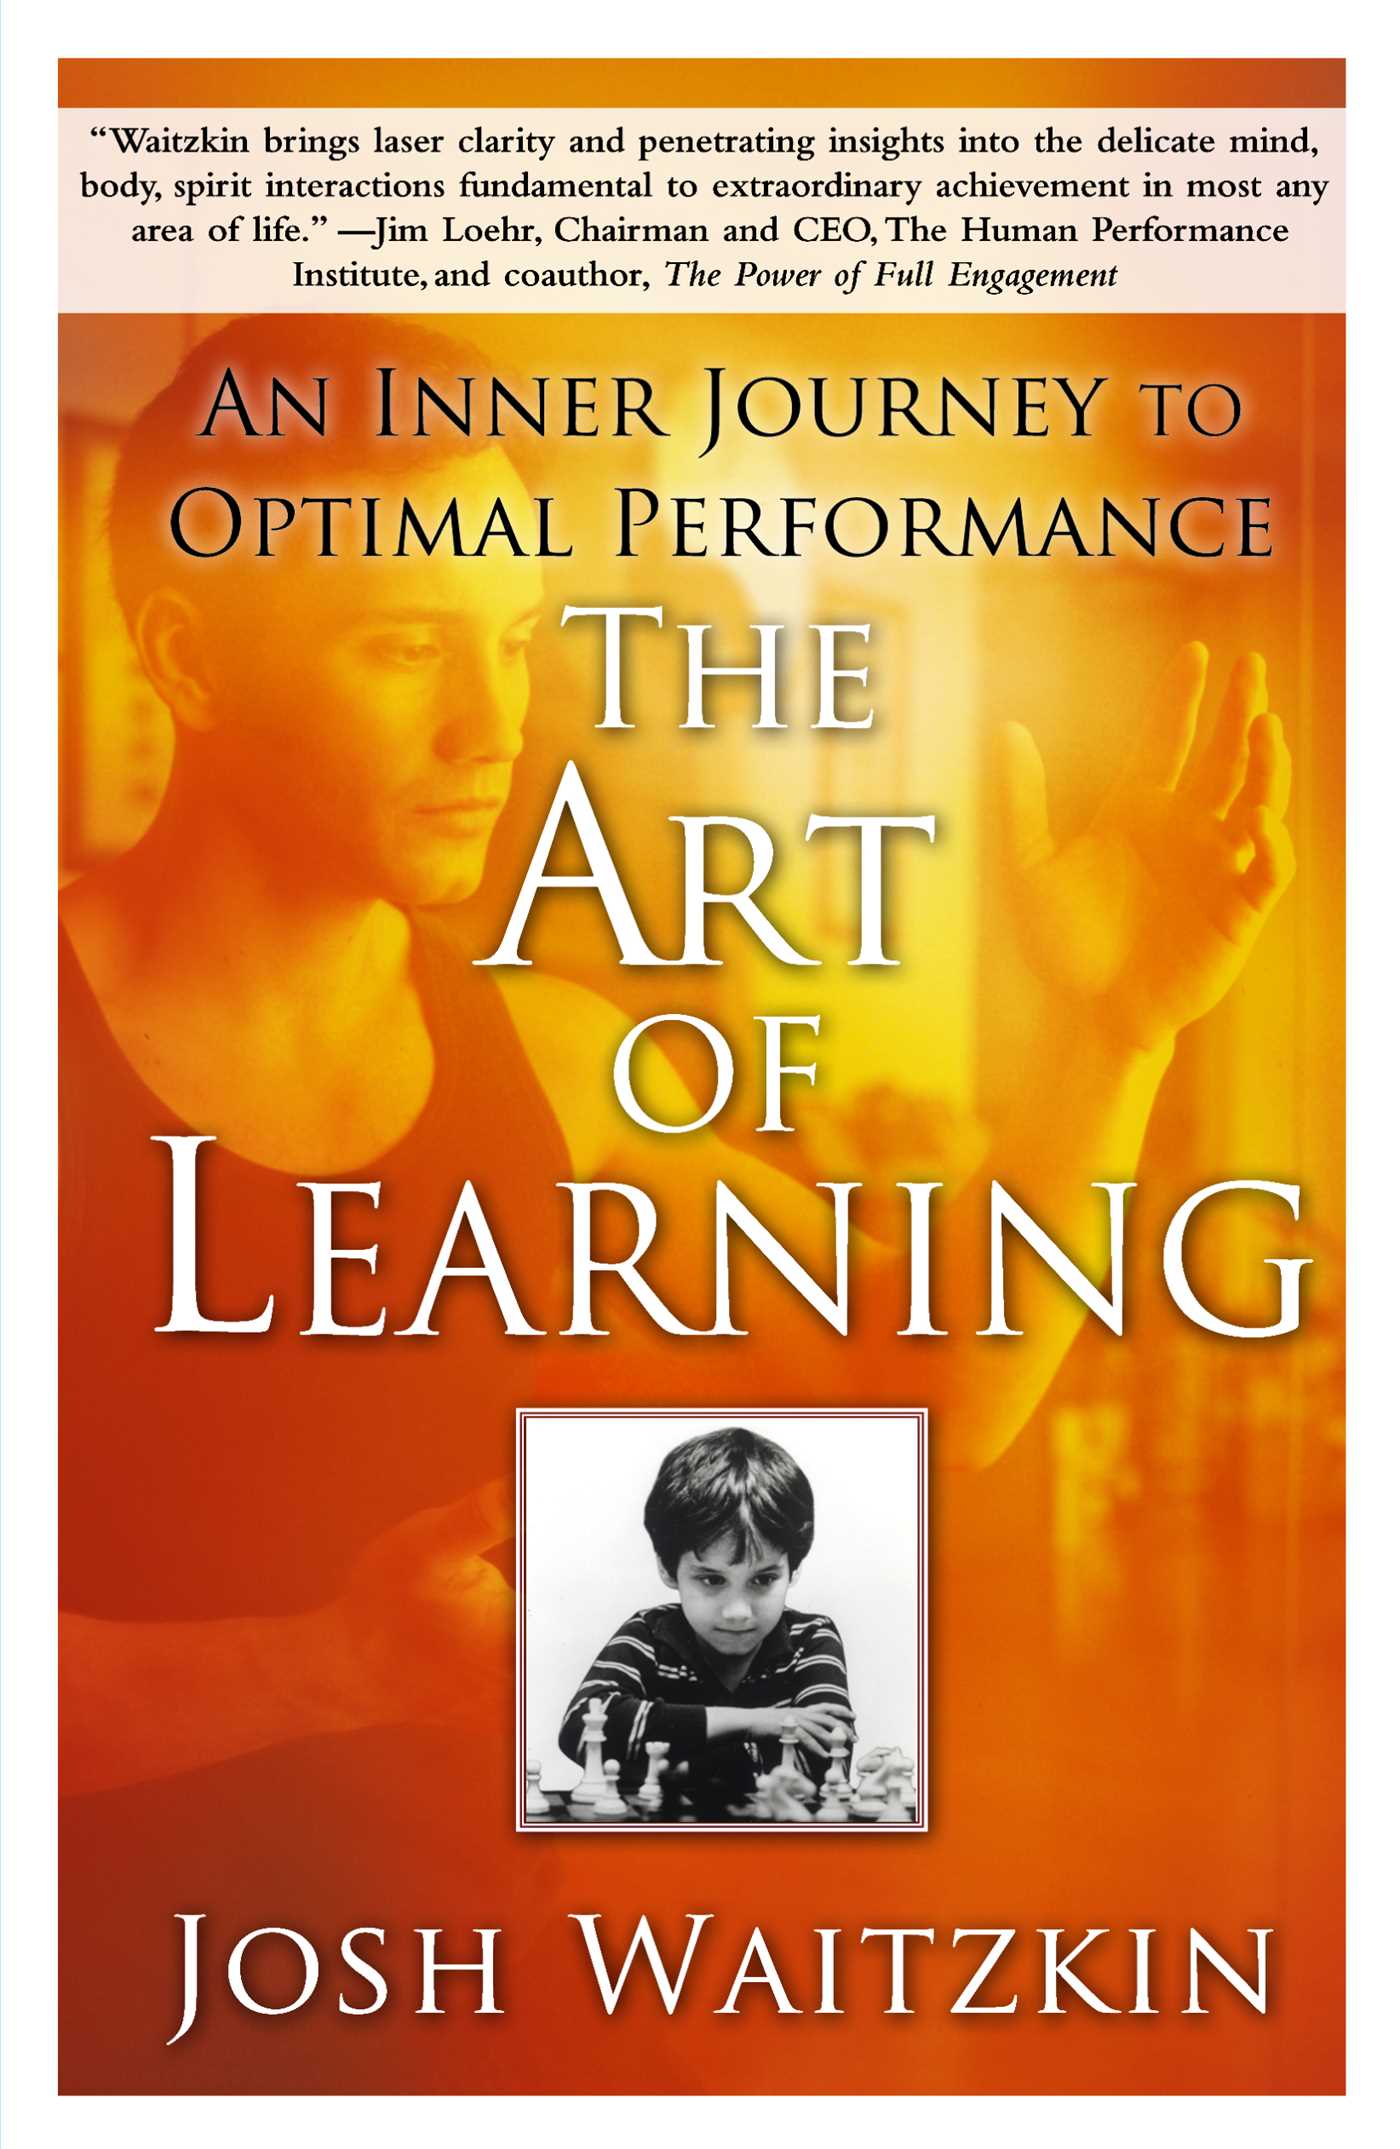 A book review of The Art of Learning by Josh Wayne